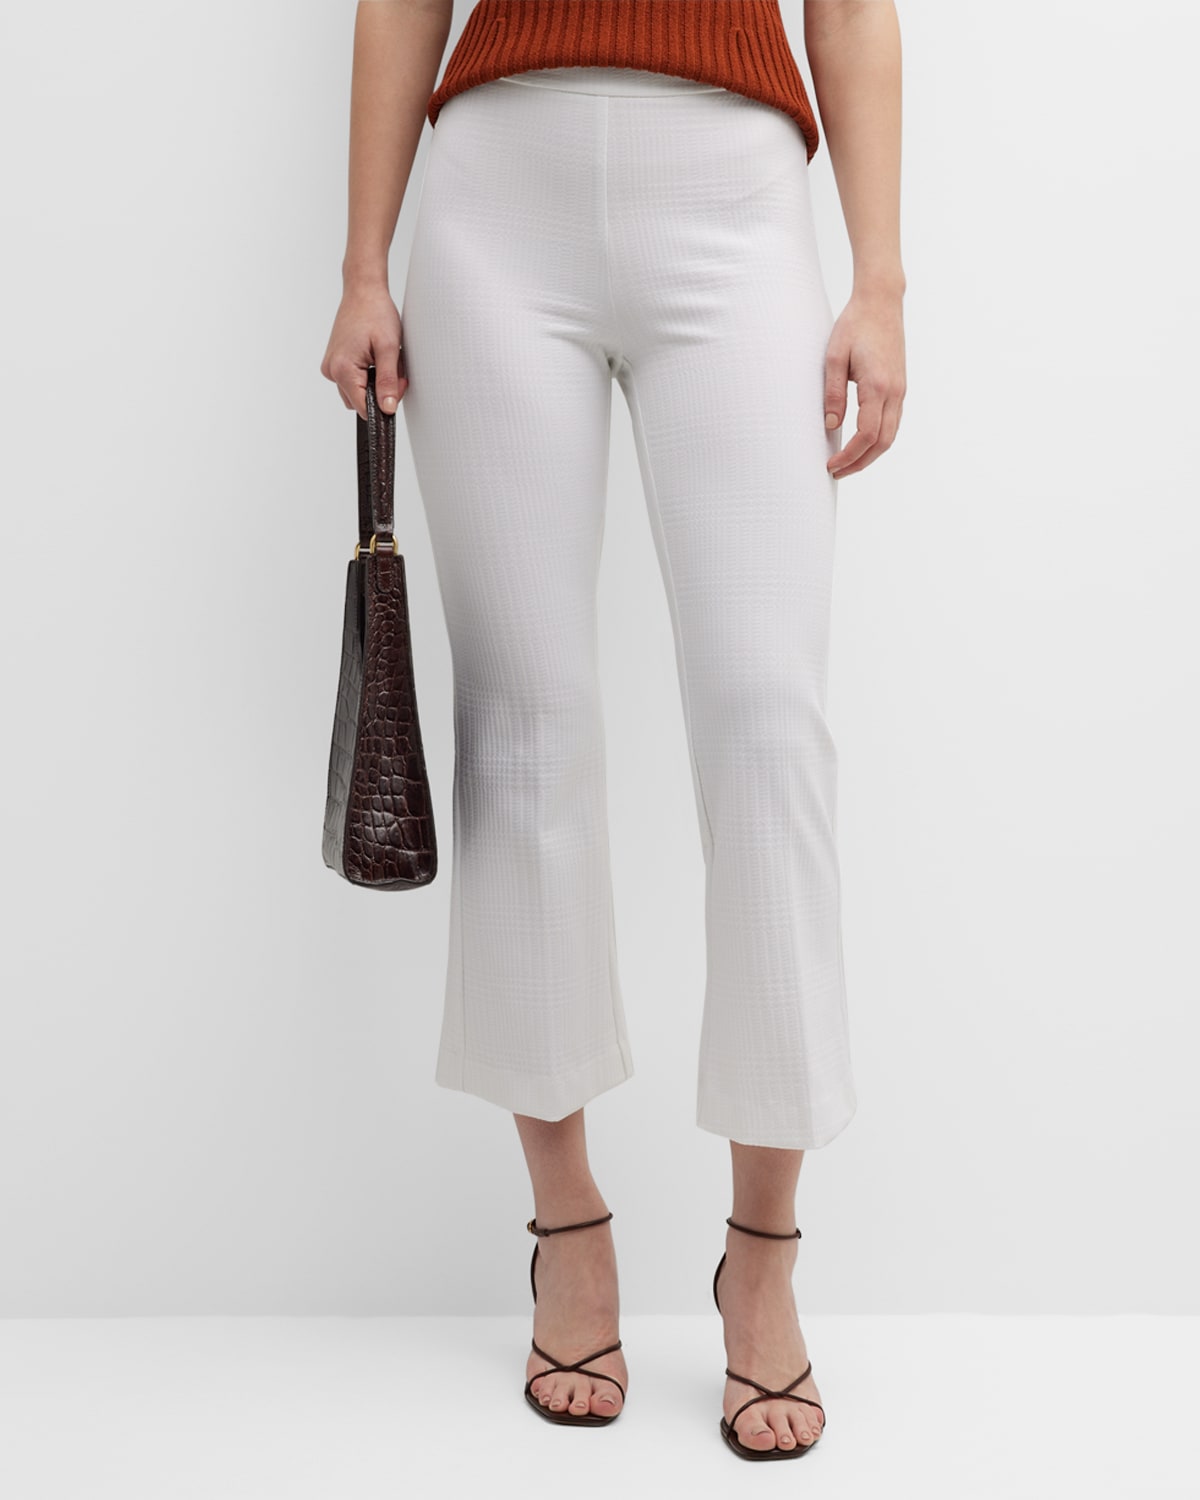 Avenue Montaigne Cropped Houndstooth Jacquard Flare Pants